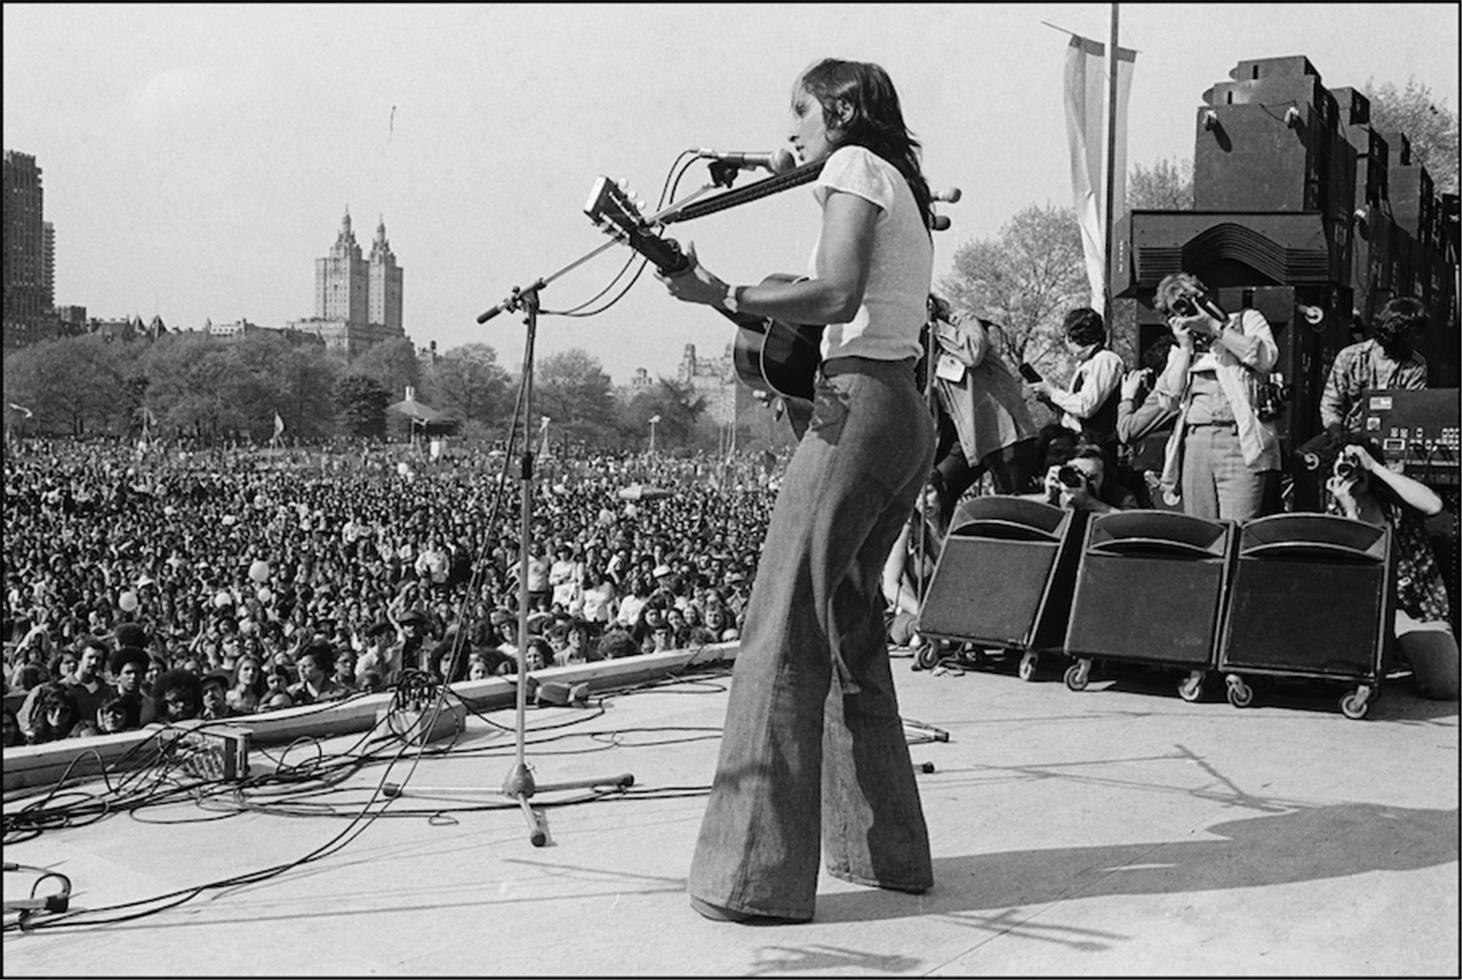 Allan Tannenbaum Black and White Photograph - Joan Baez, War is Over Rally, Central Park, NYC, 1975